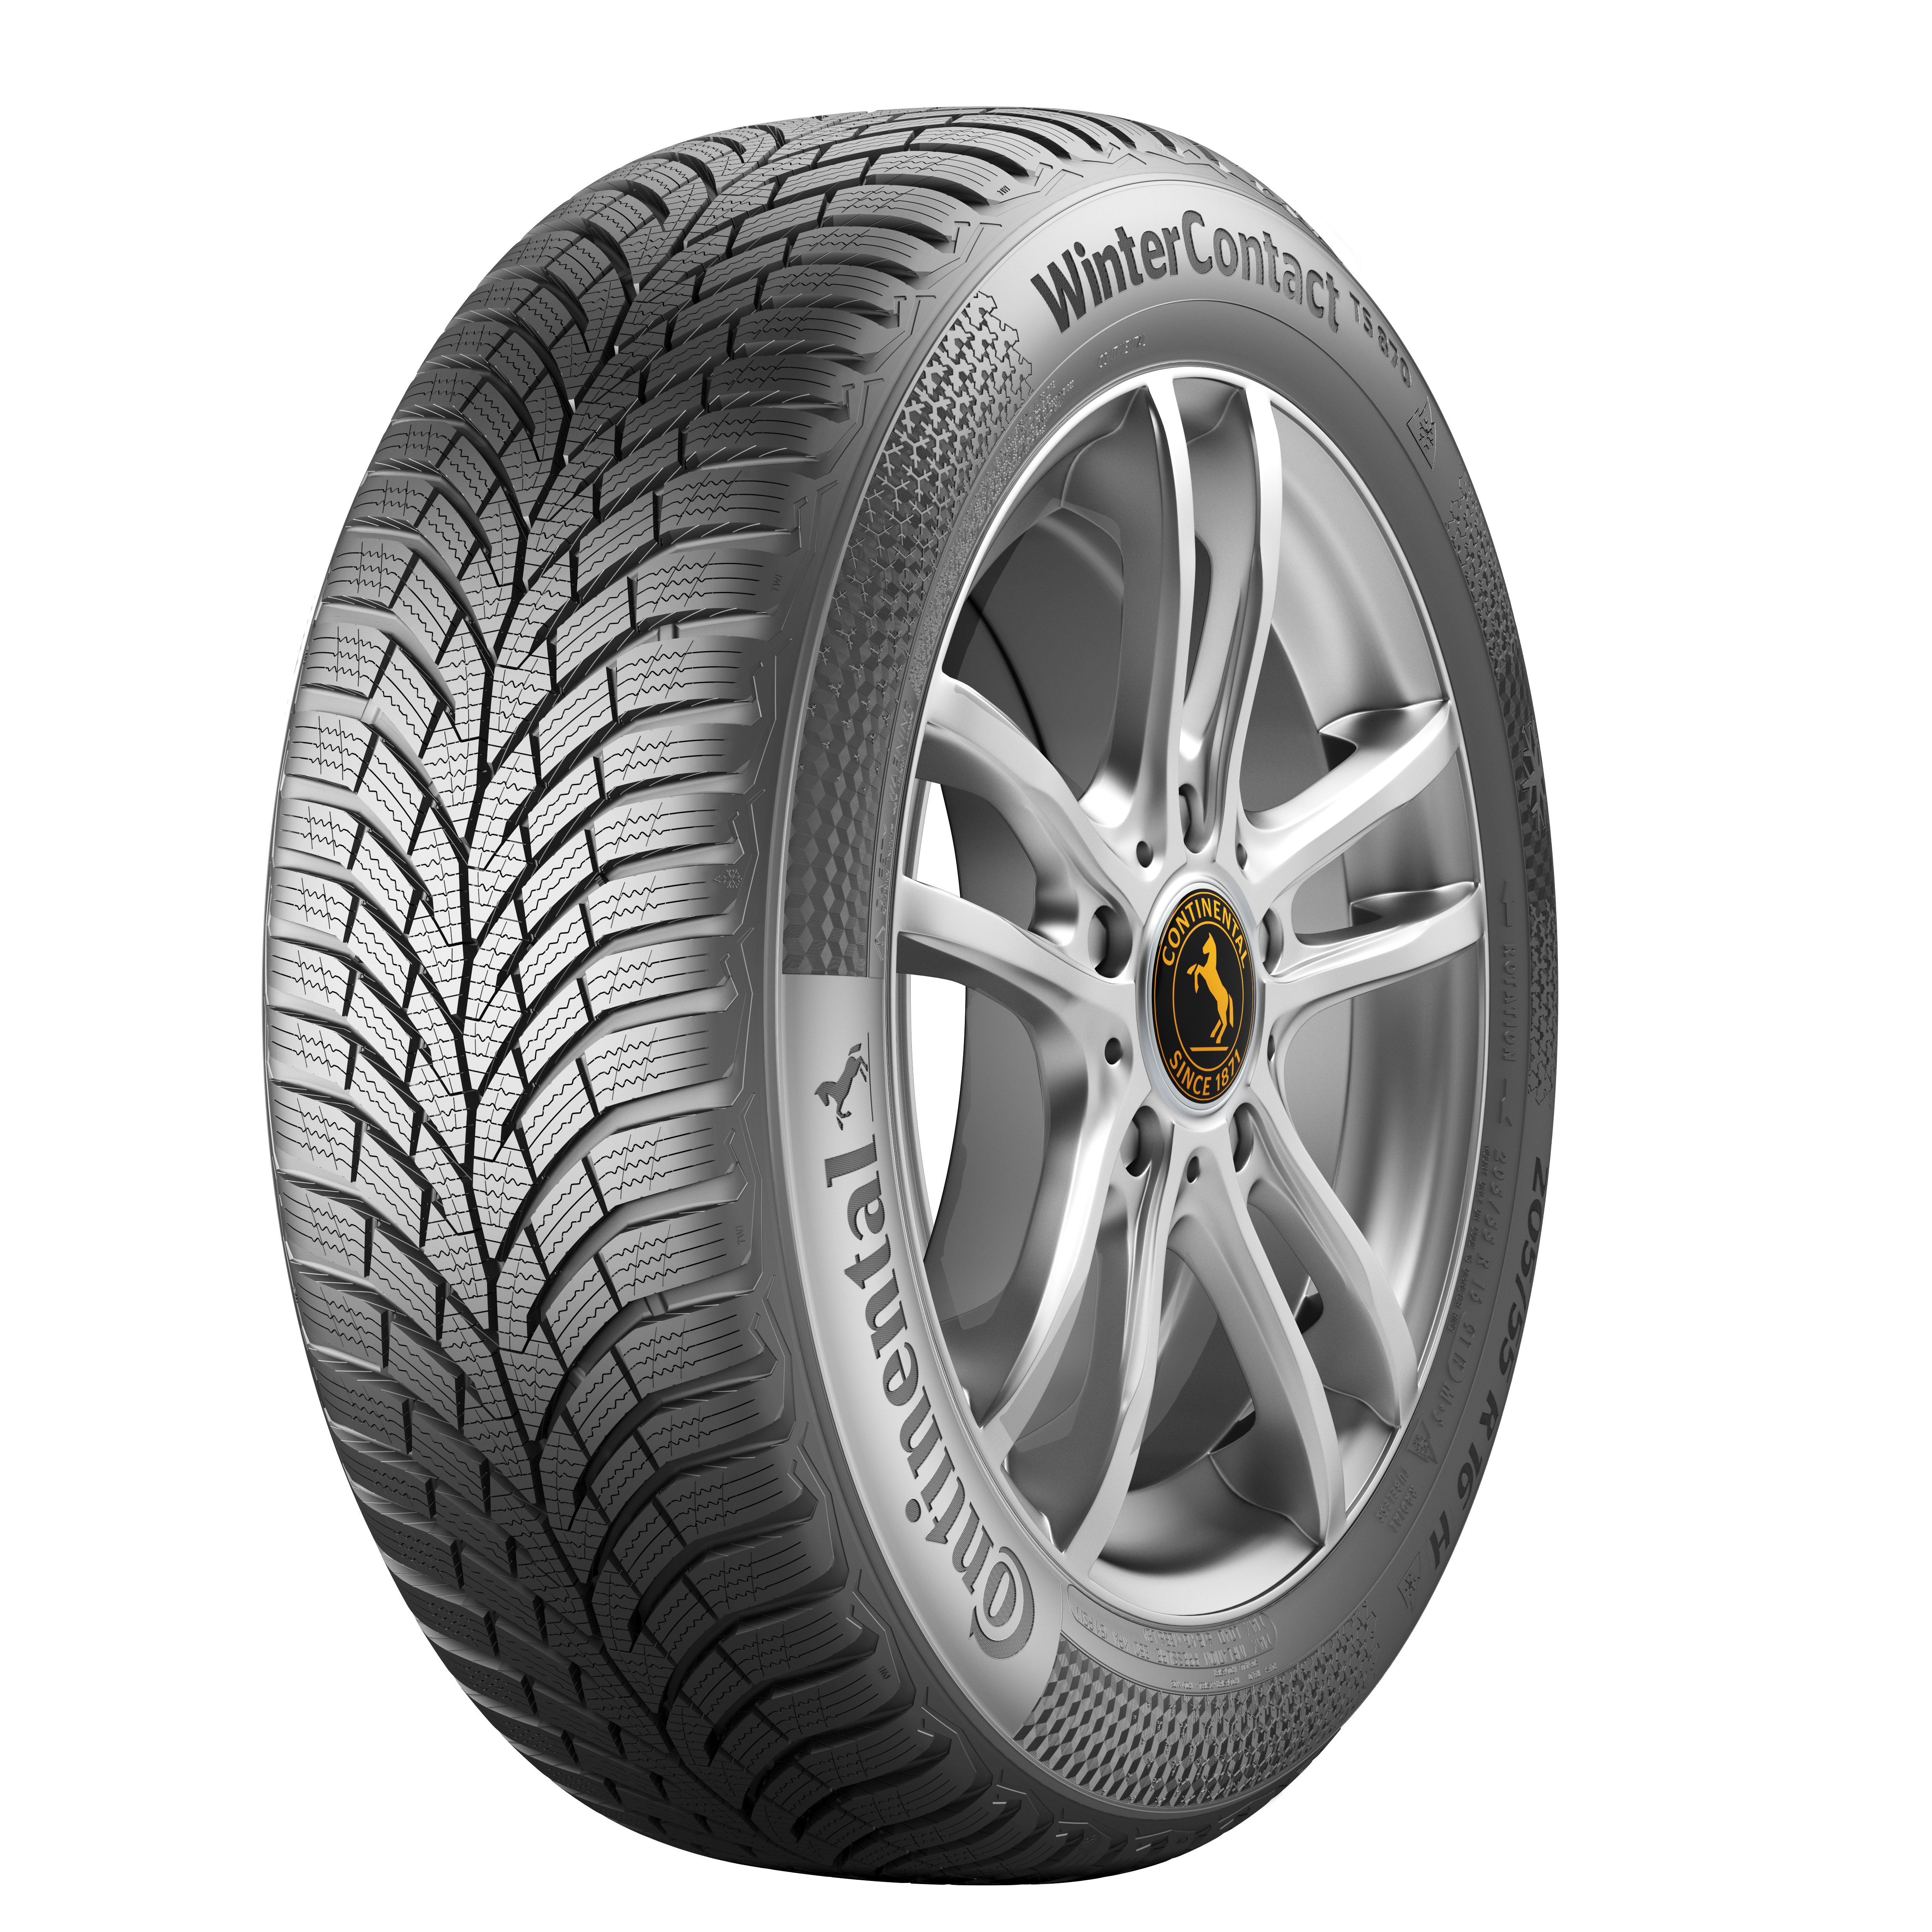 Continental with AG Rating in Winter Tire - 2023 ADAC Test Continental Top